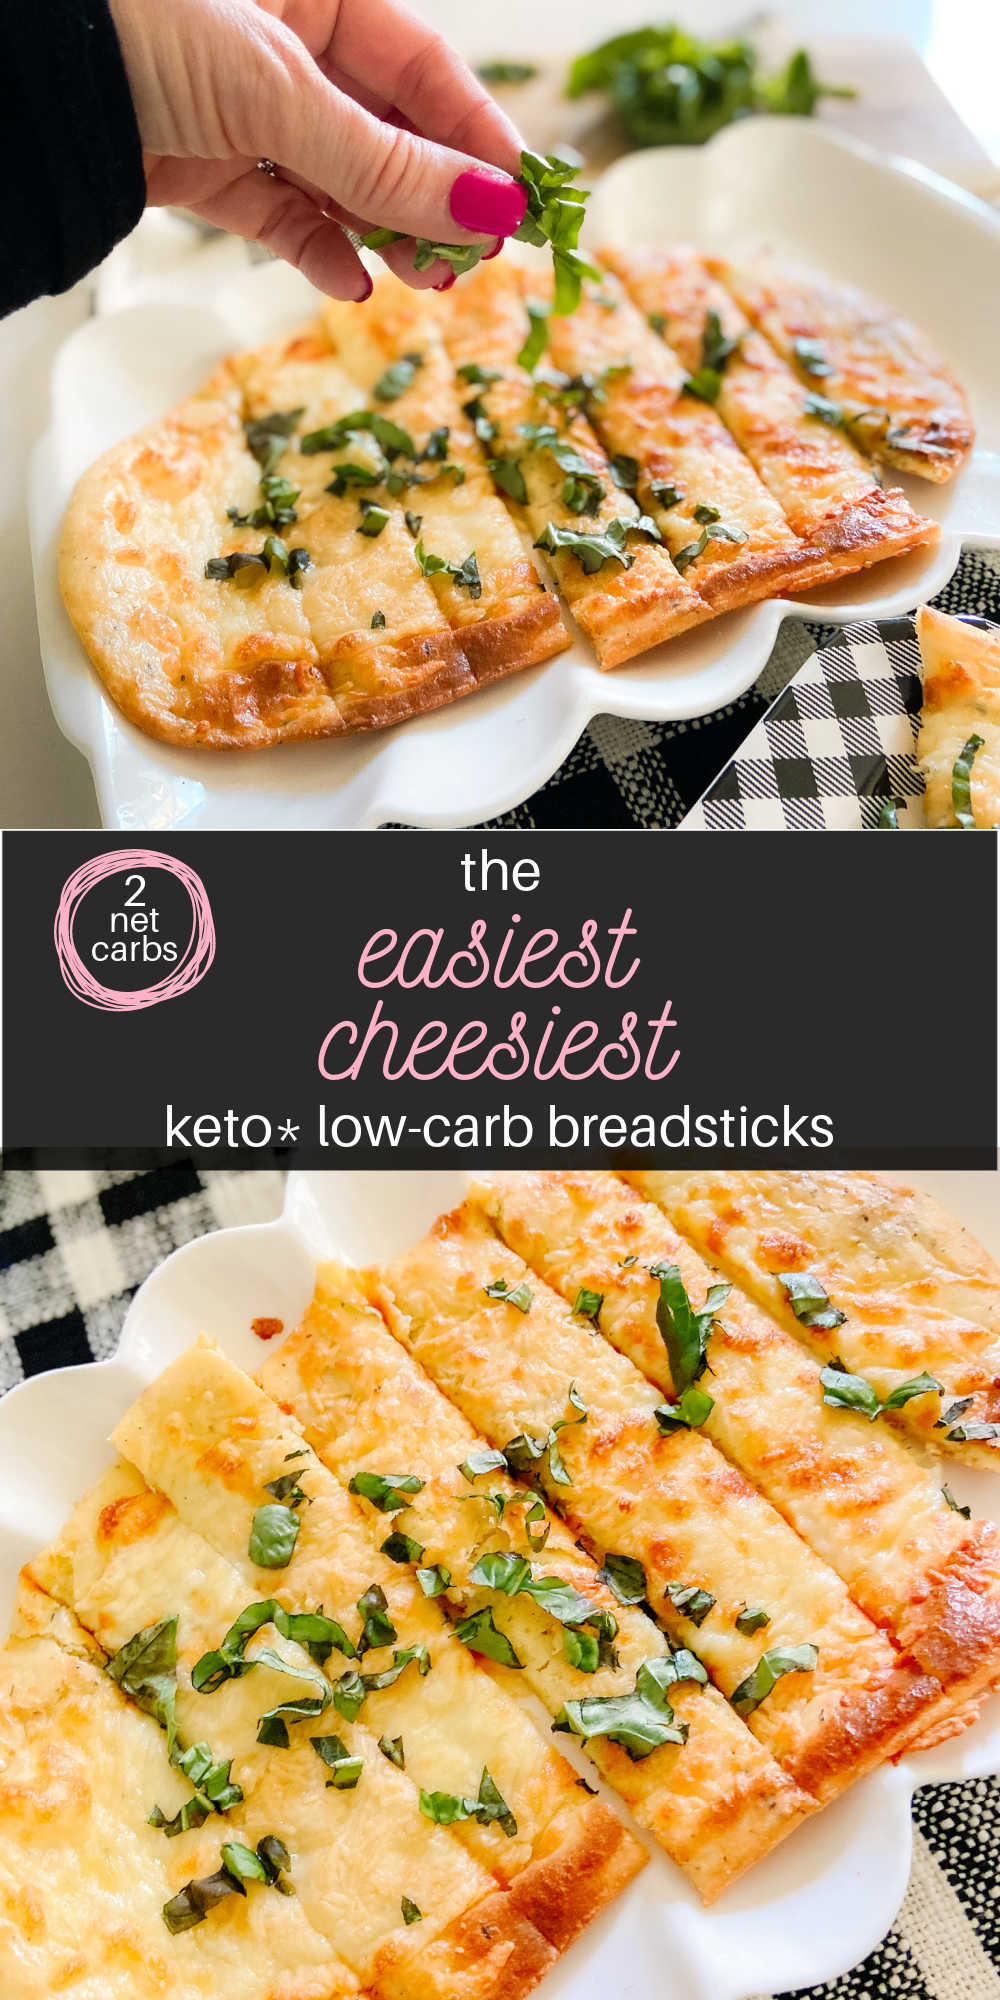 The Easiest Cheesiest Keto Breadsticks. Make these low-carb cheesy, flavorful breadsticks in under 30 minutes. Perfect on their own with marinara sauce or paired with a Keto soup or salad! 